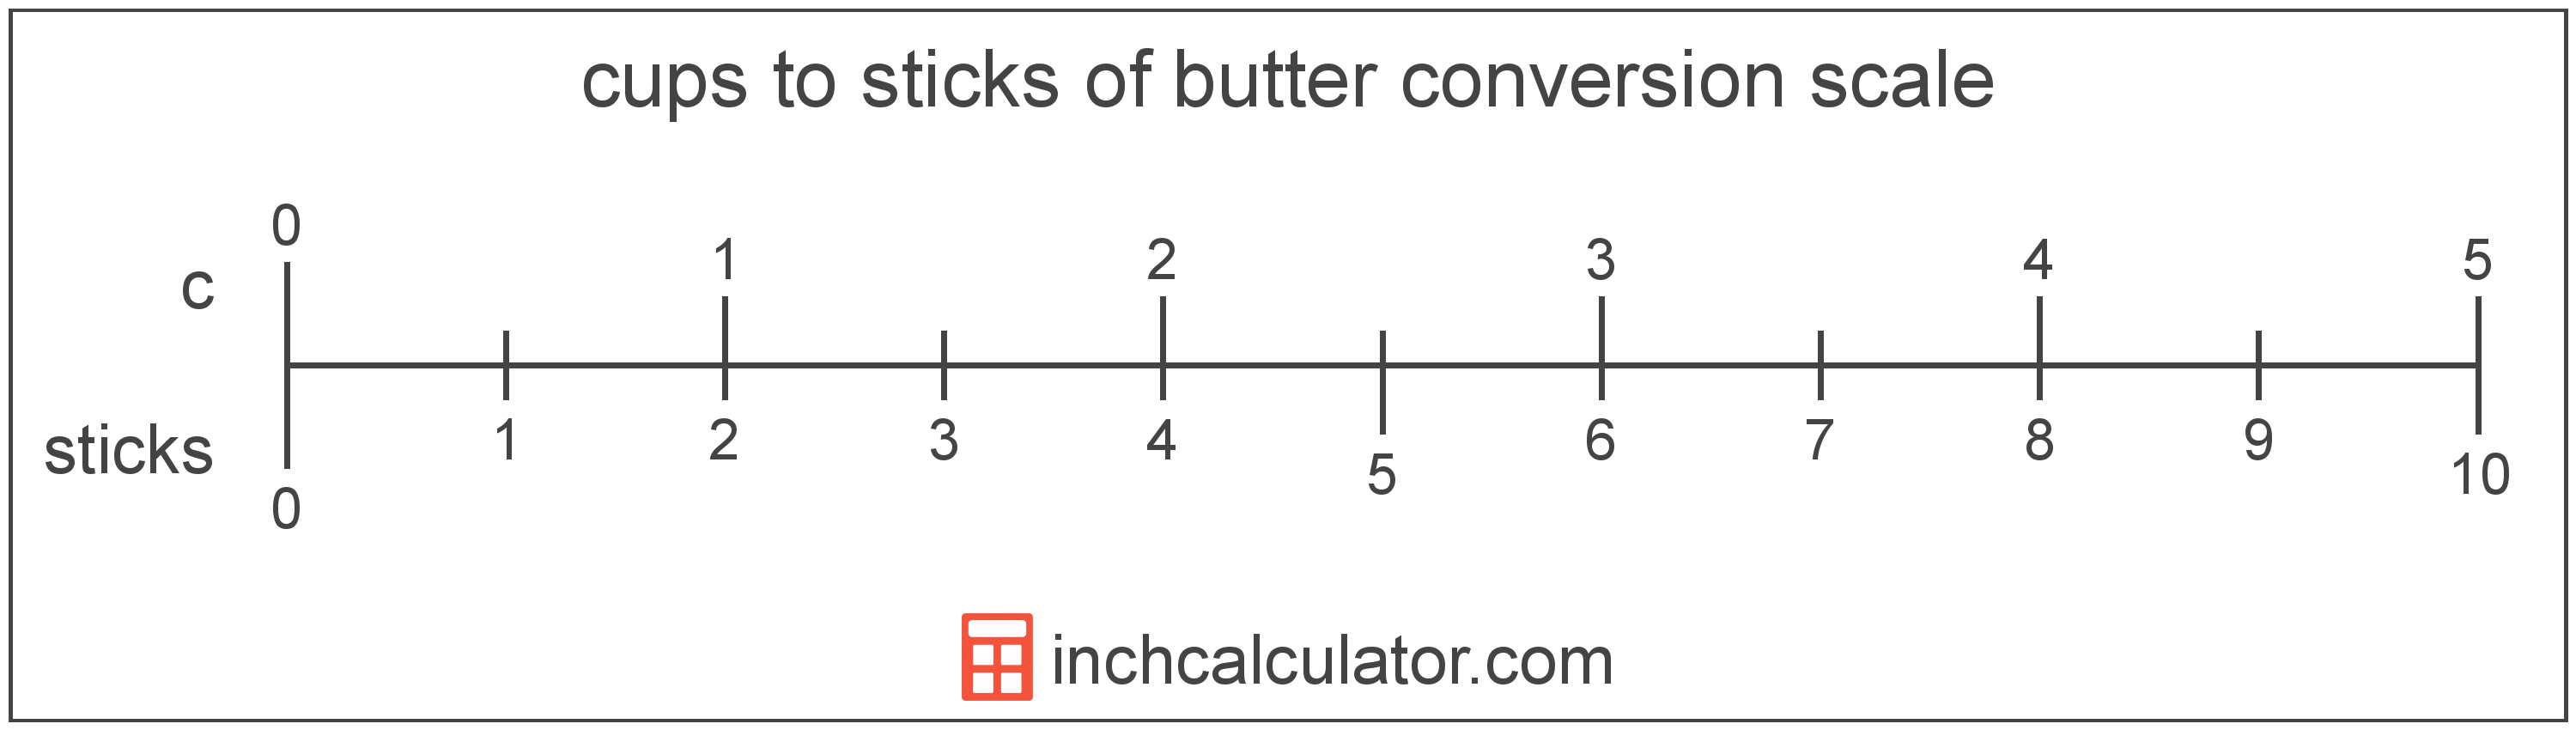 conversion scale showing sticks of butter and equivalent cups butter values